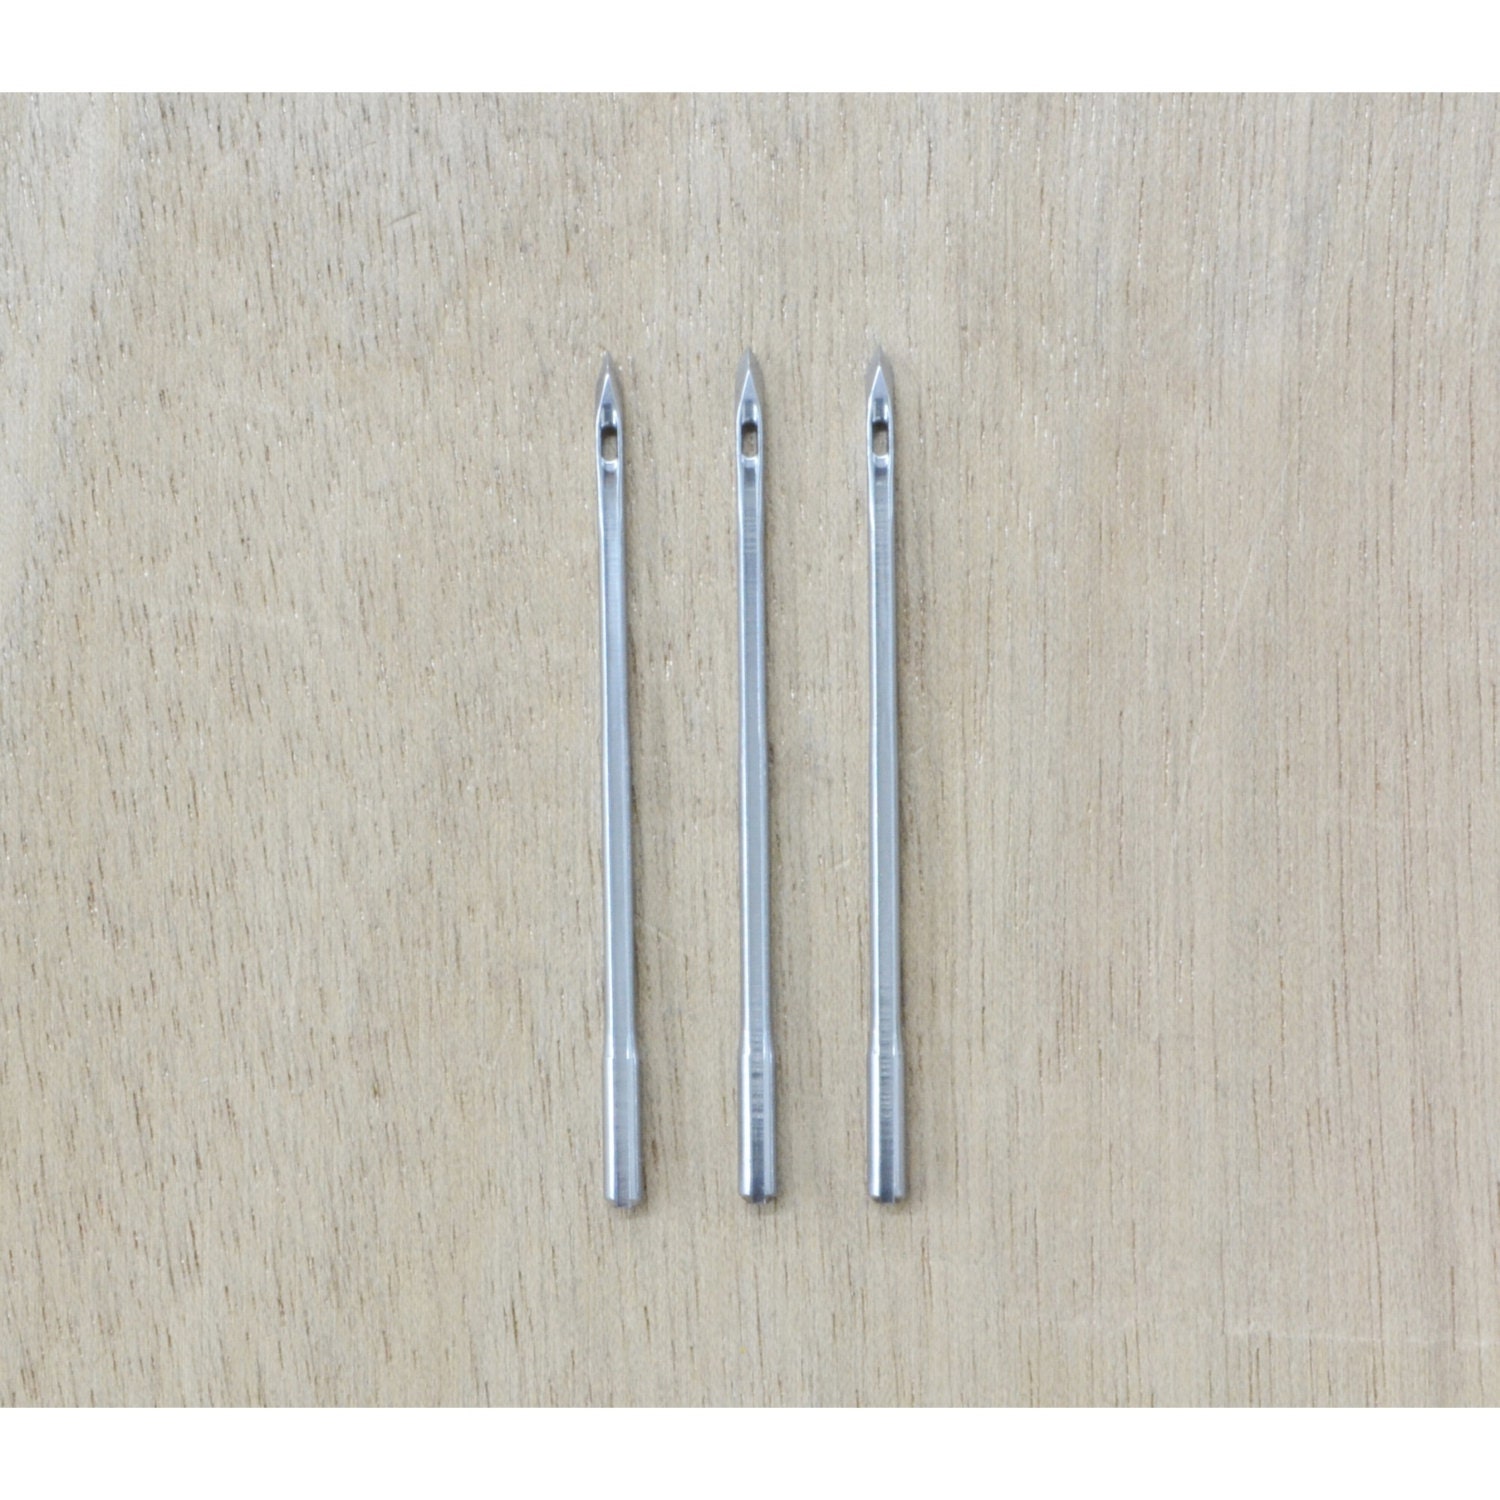 Sewing Awl Needles-3 Pack 6 Curved 8 OR 5 OR One of